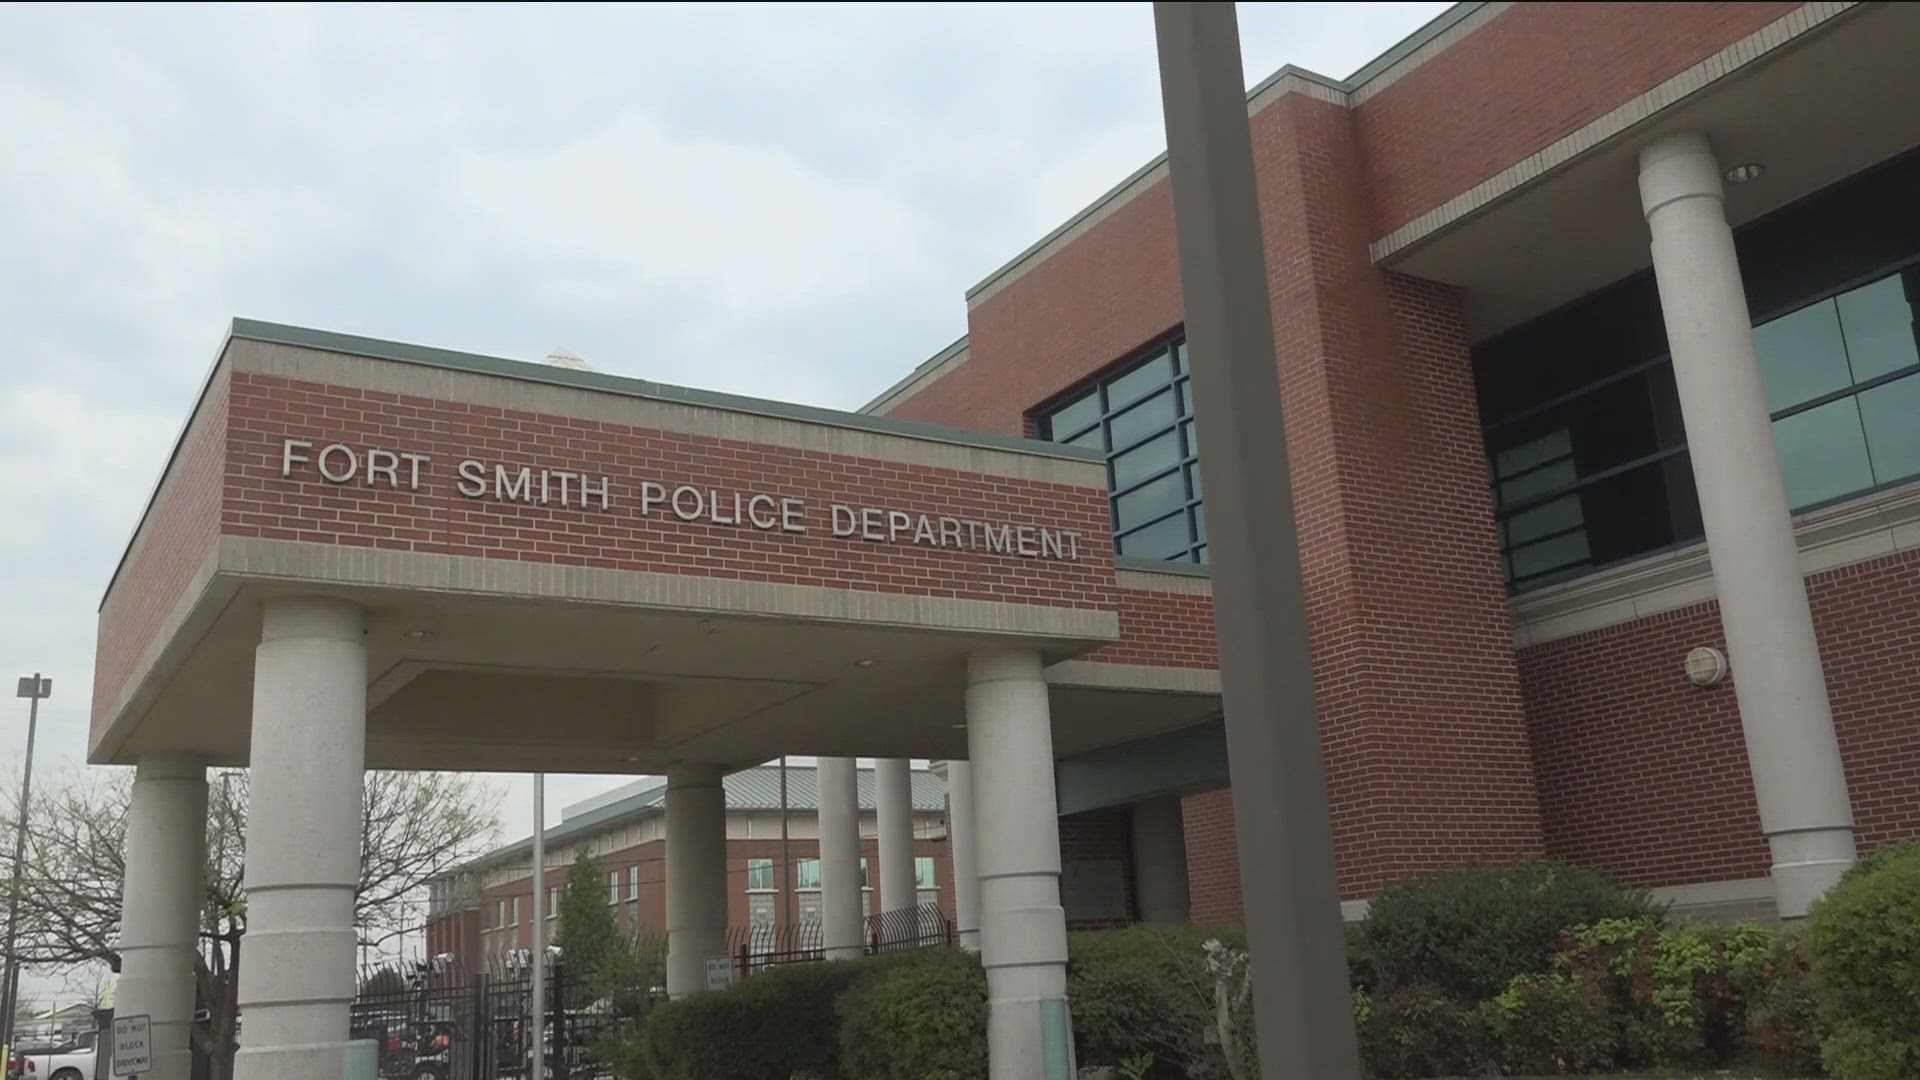 Since January, 5NEWS has reported on six different robberies in the Fort Smith area.